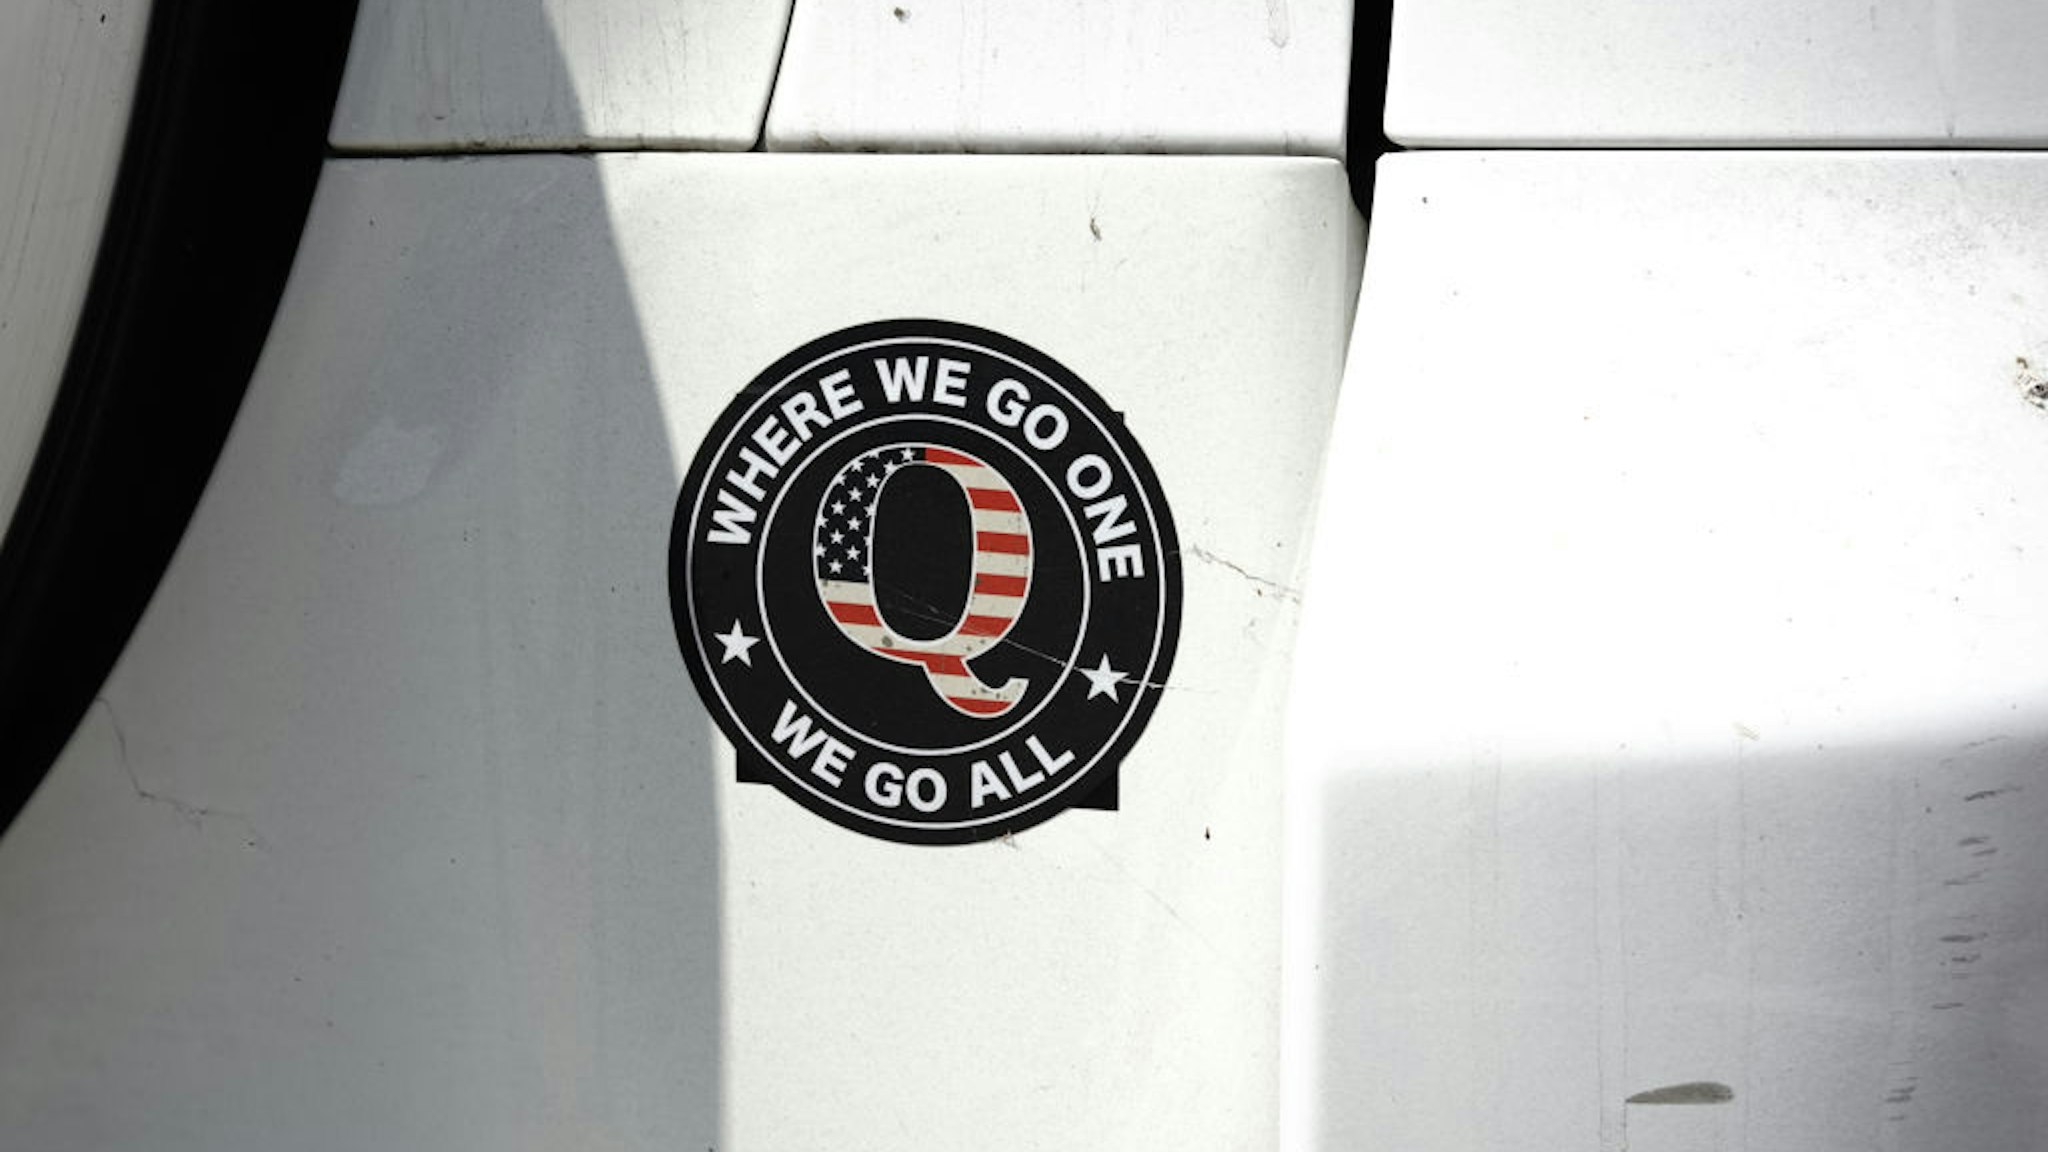 A QAnon bumper sticker is seen on a car outside a campaign rally for U.S. President Donald Trump at Yuma International Airport in Yuma, Arizona, U.S., on Tuesday, Aug. 18, 2020. Trump portrayed Joe Biden as soft on illegal immigration in a speech Tuesday afternoon near the southern U.S. border, reprising a central theme of his 2016 campaign. Photographer: Bing Guan/Bloomberg via Getty Images